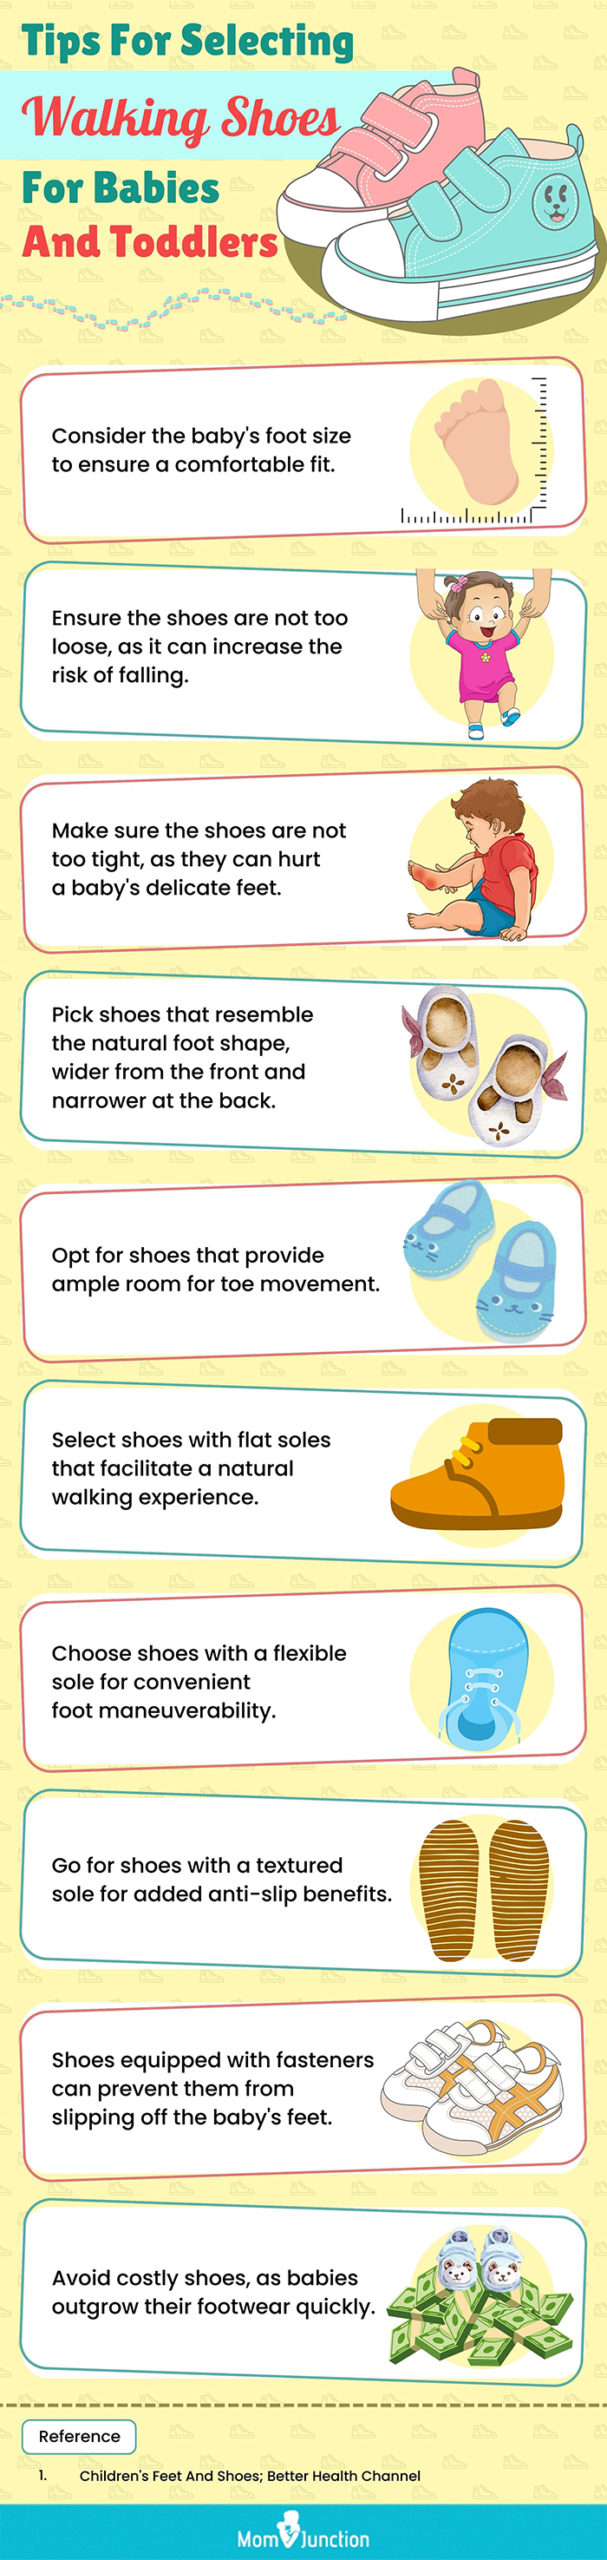 Tips For Selecting Walking Shoes For Babies And Toddlers (infographic)